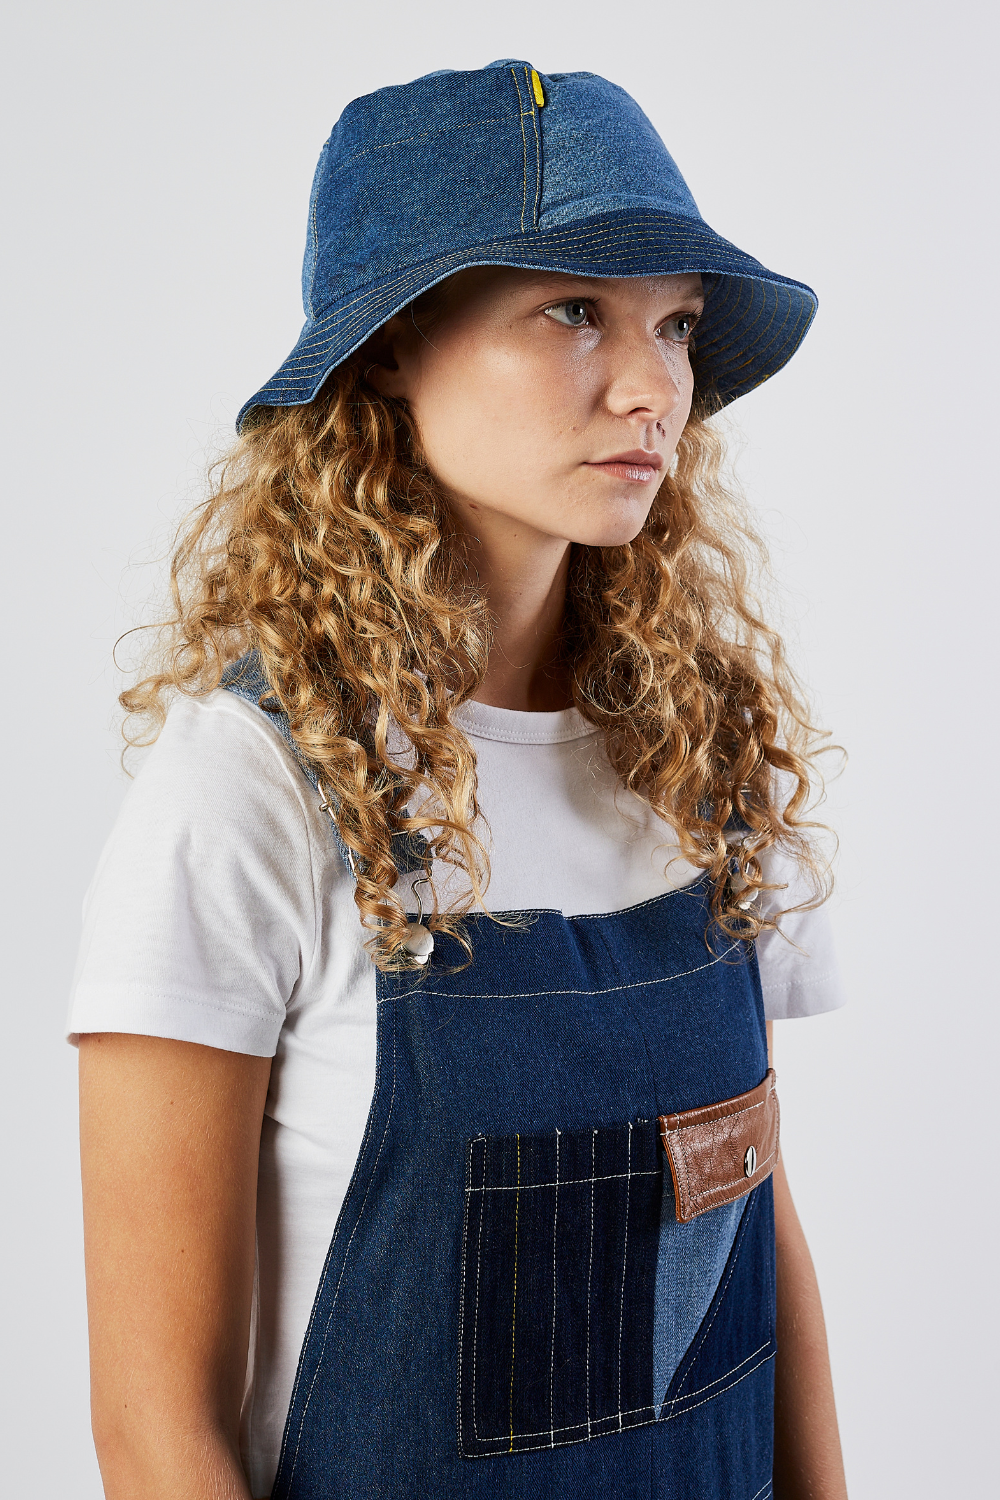 Ava And Ever Louis Bucket Hat In Blue Denim - FREE* Shipping & Easy Returns  - City Beach United States